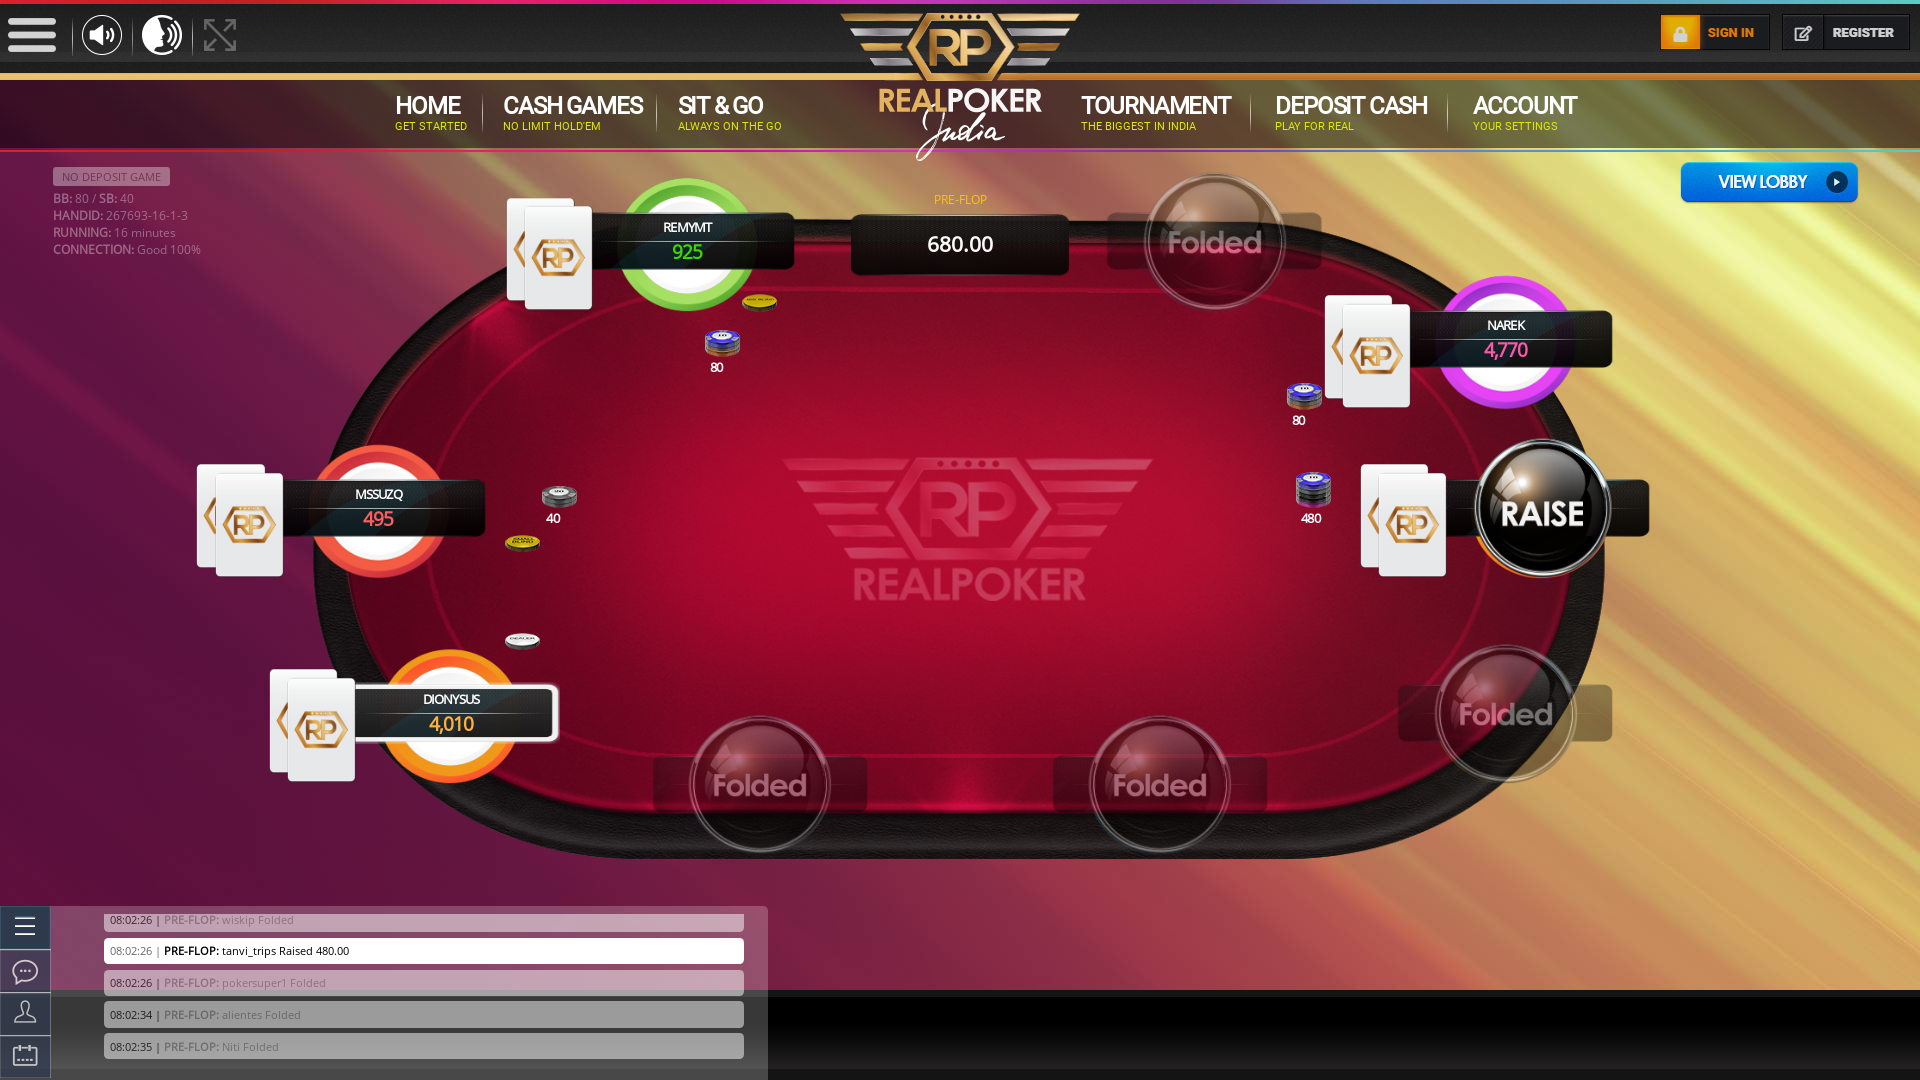 Indian poker on a 10 player table in the 16th minute